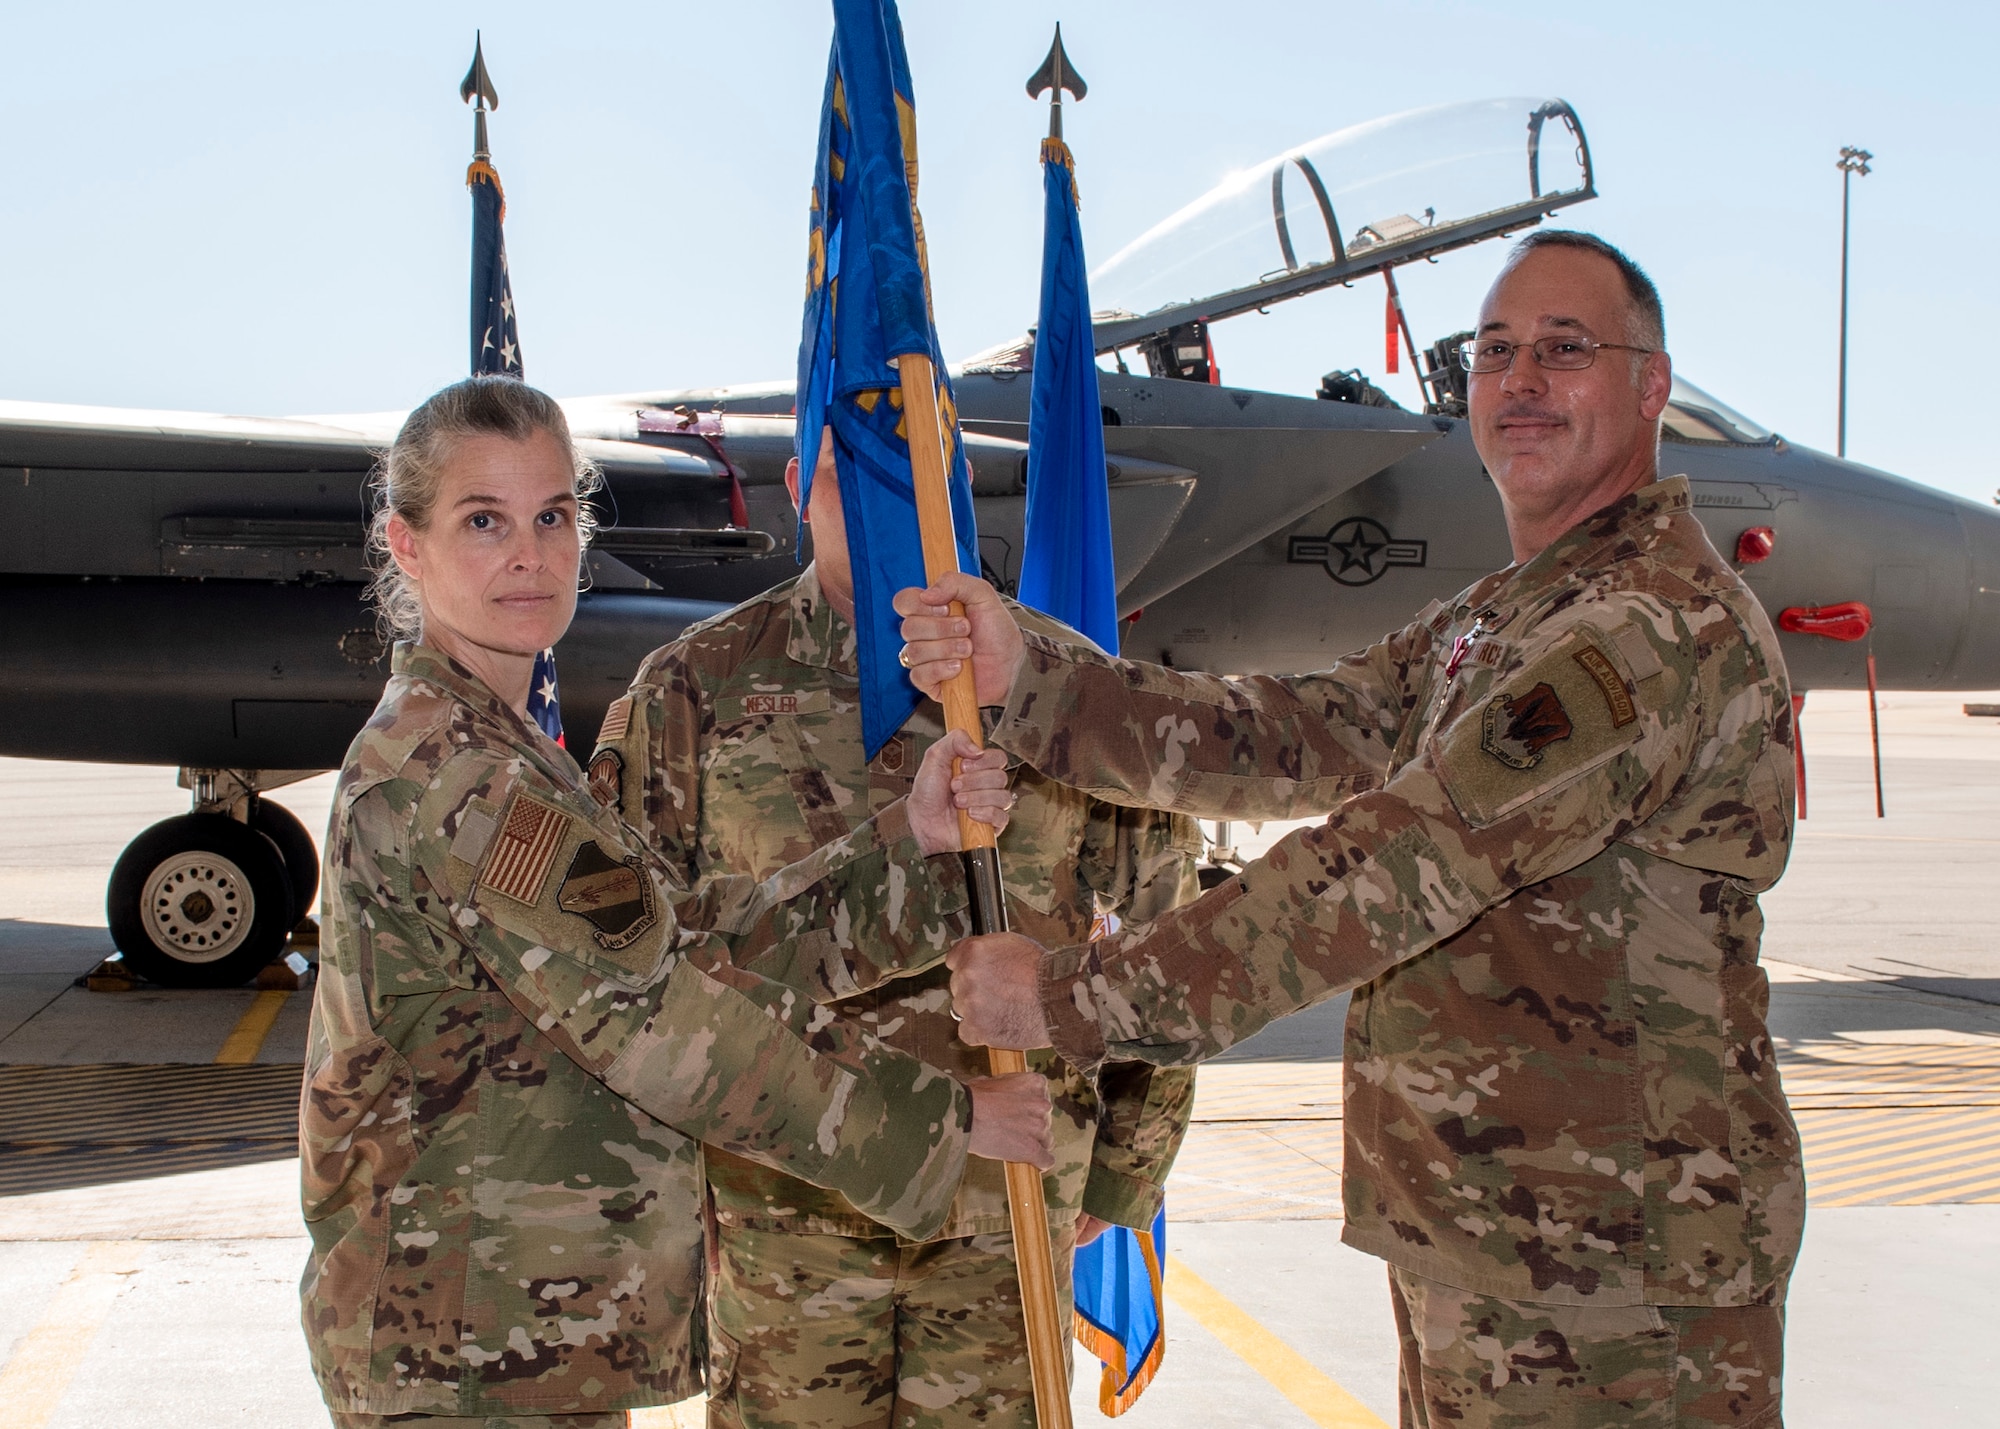 Maj. John R. Ware, 4th Equipment Maintenance Squadron commander (right), passes the guidon flag to Col. Leah R. Fry, 4th Maintenance Group commander (left),during a change of command ceremony at Seymour Johnson Air Force Base, North Carolina, June 26, 2020.